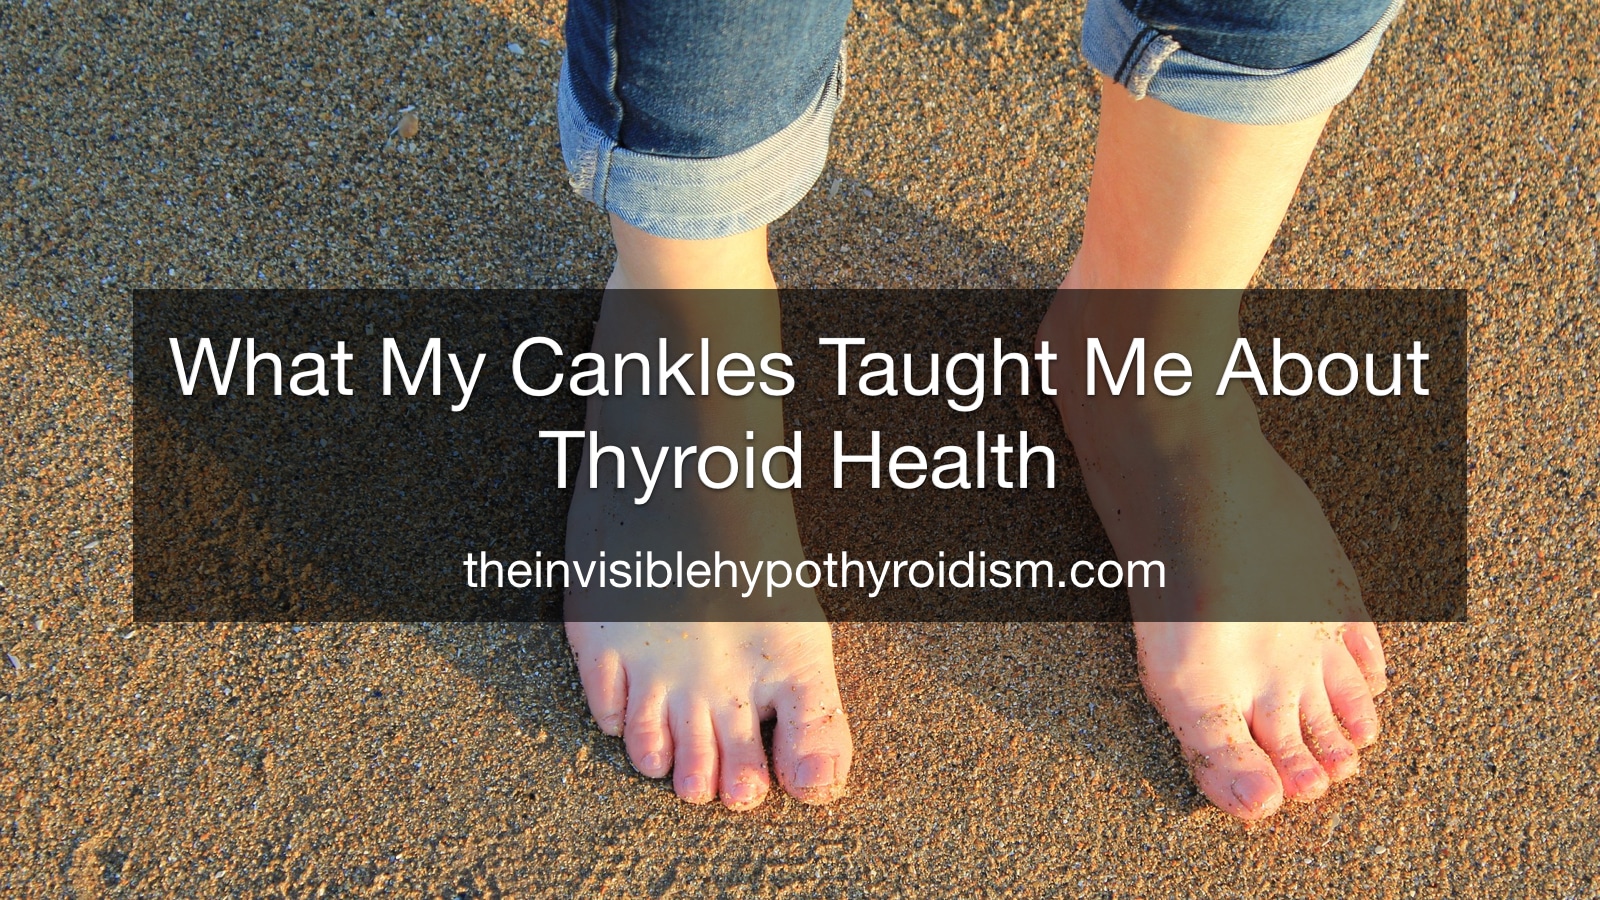 What My Cankles Taught Me About Thyroid Health